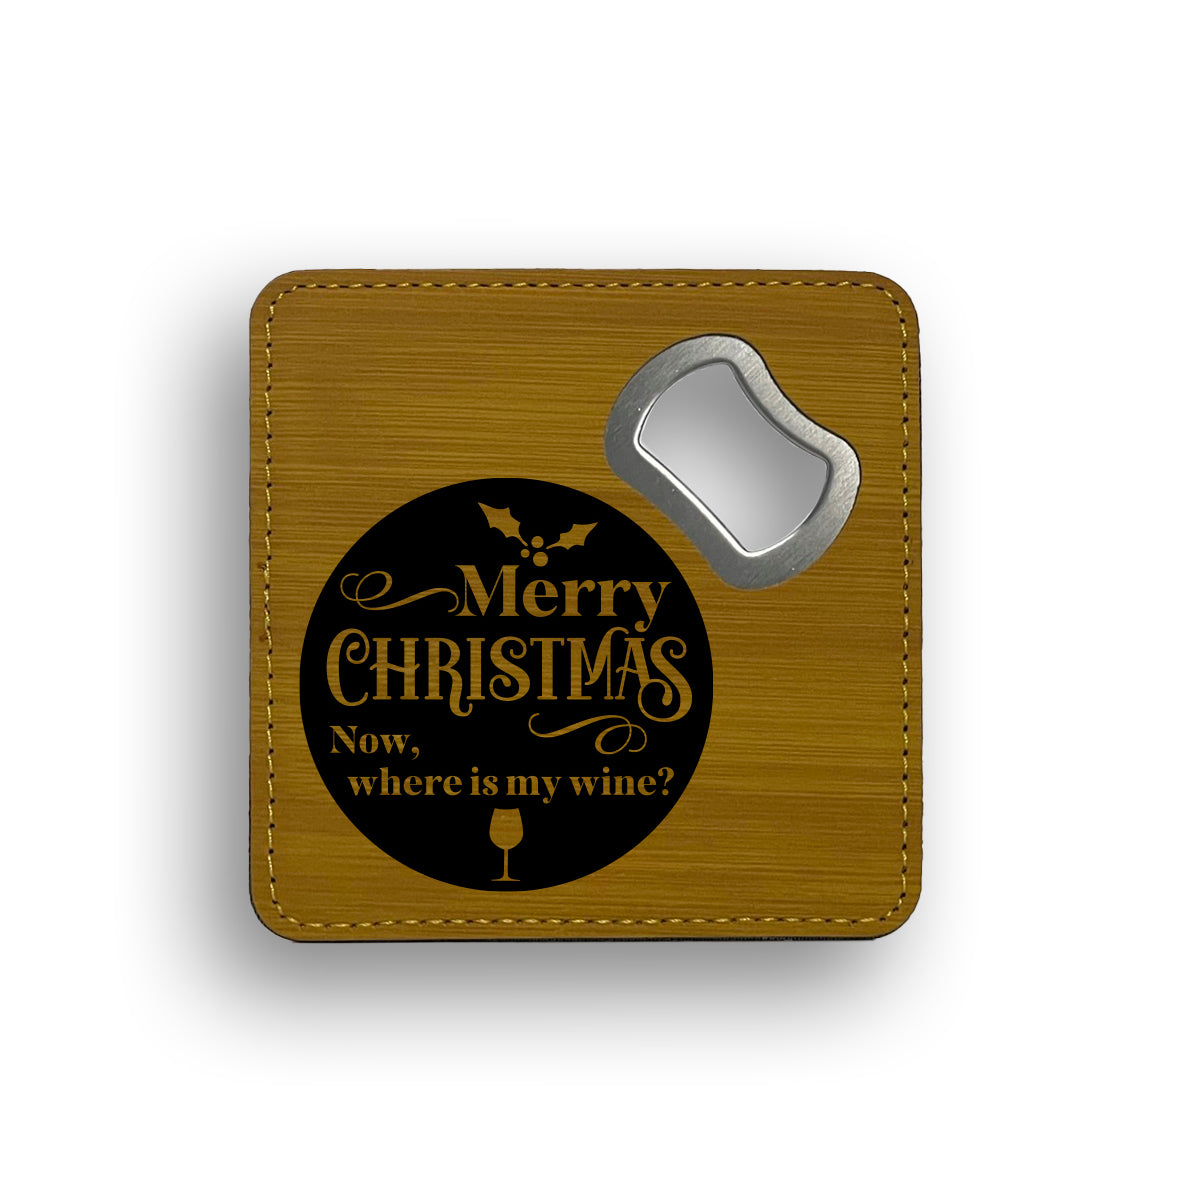 Merry Christmas Now Where Is The Wine Bottle Opener Coaster